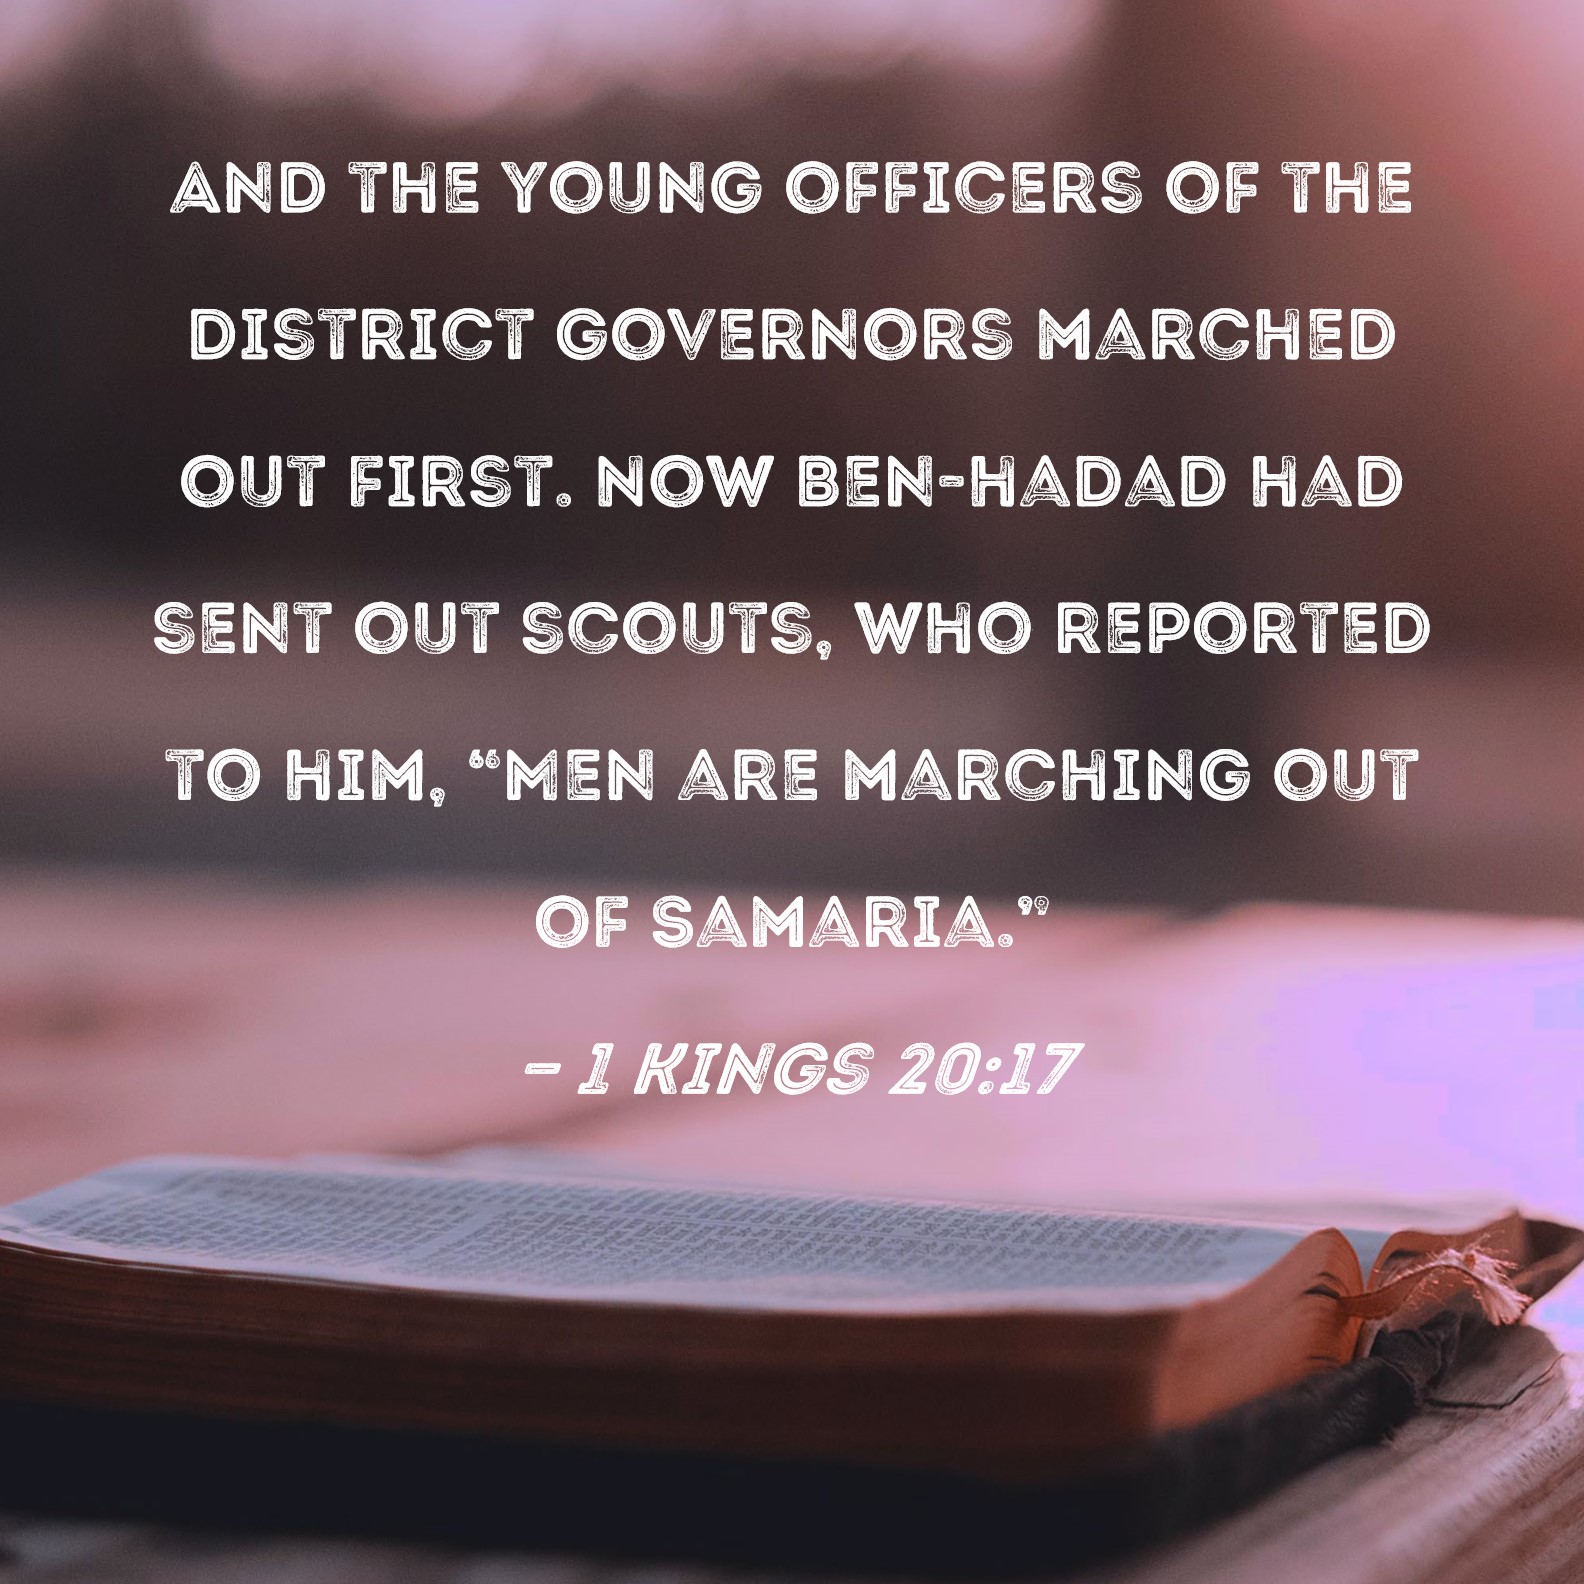 1-kings-20-17-and-the-young-officers-of-the-district-governors-marched